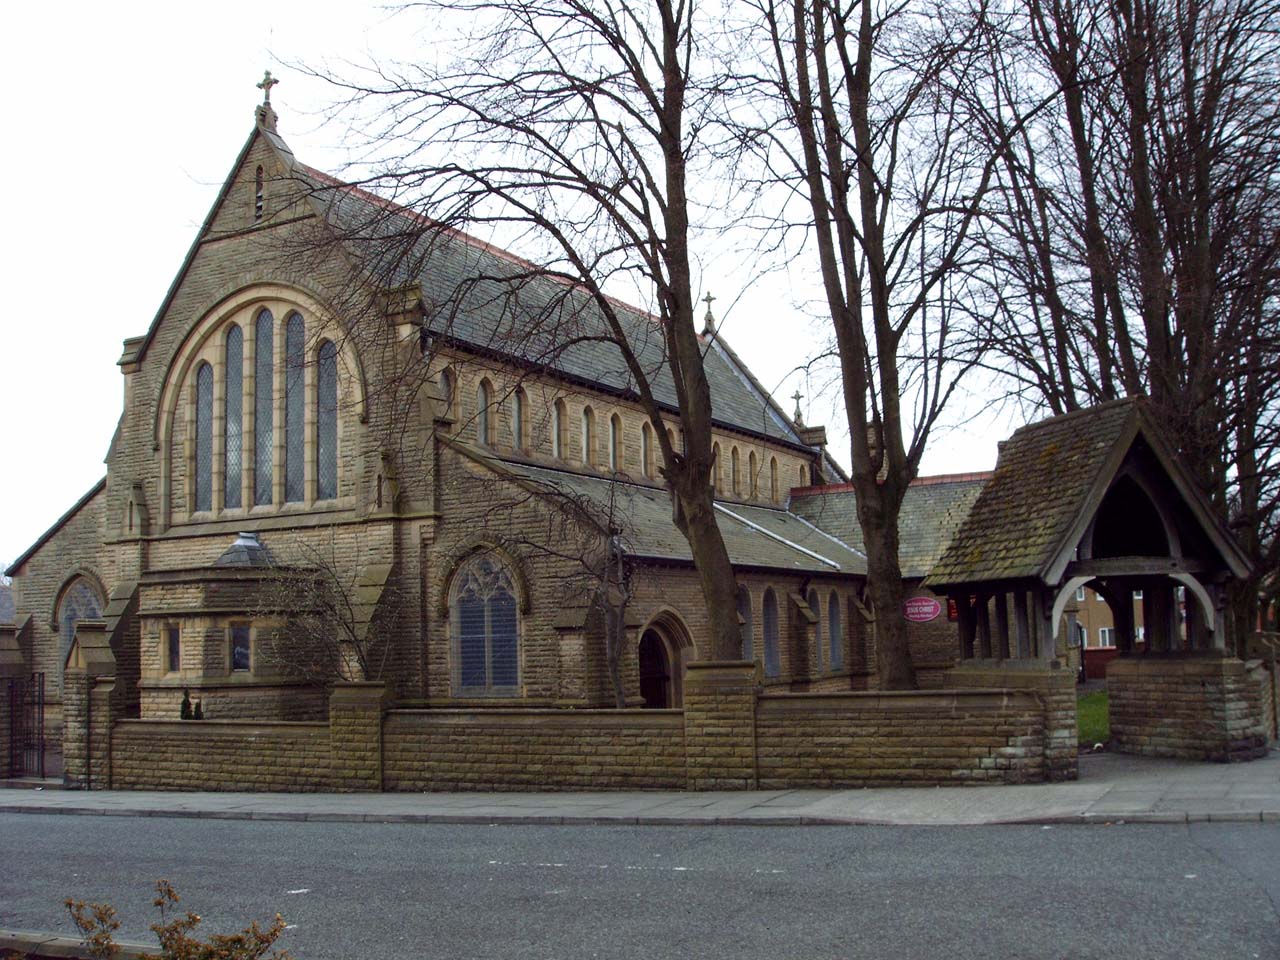 The Church of St Stephen, Little Harwood